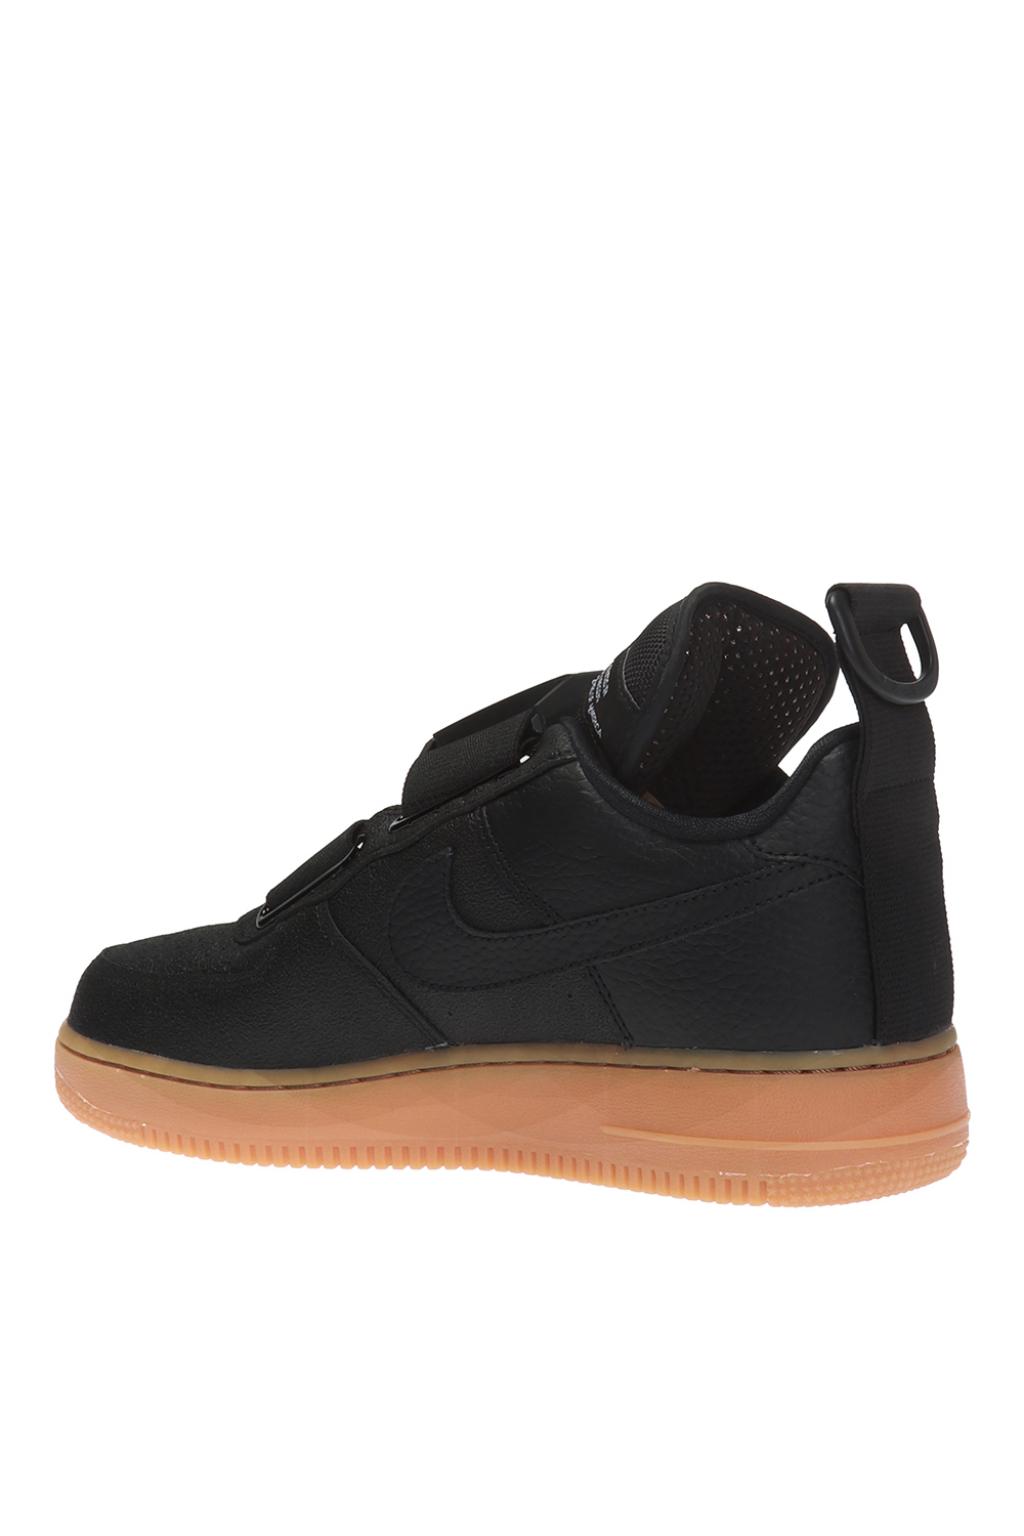 Nike 'Air Force 1 Utility' sneakers, Men's Shoes